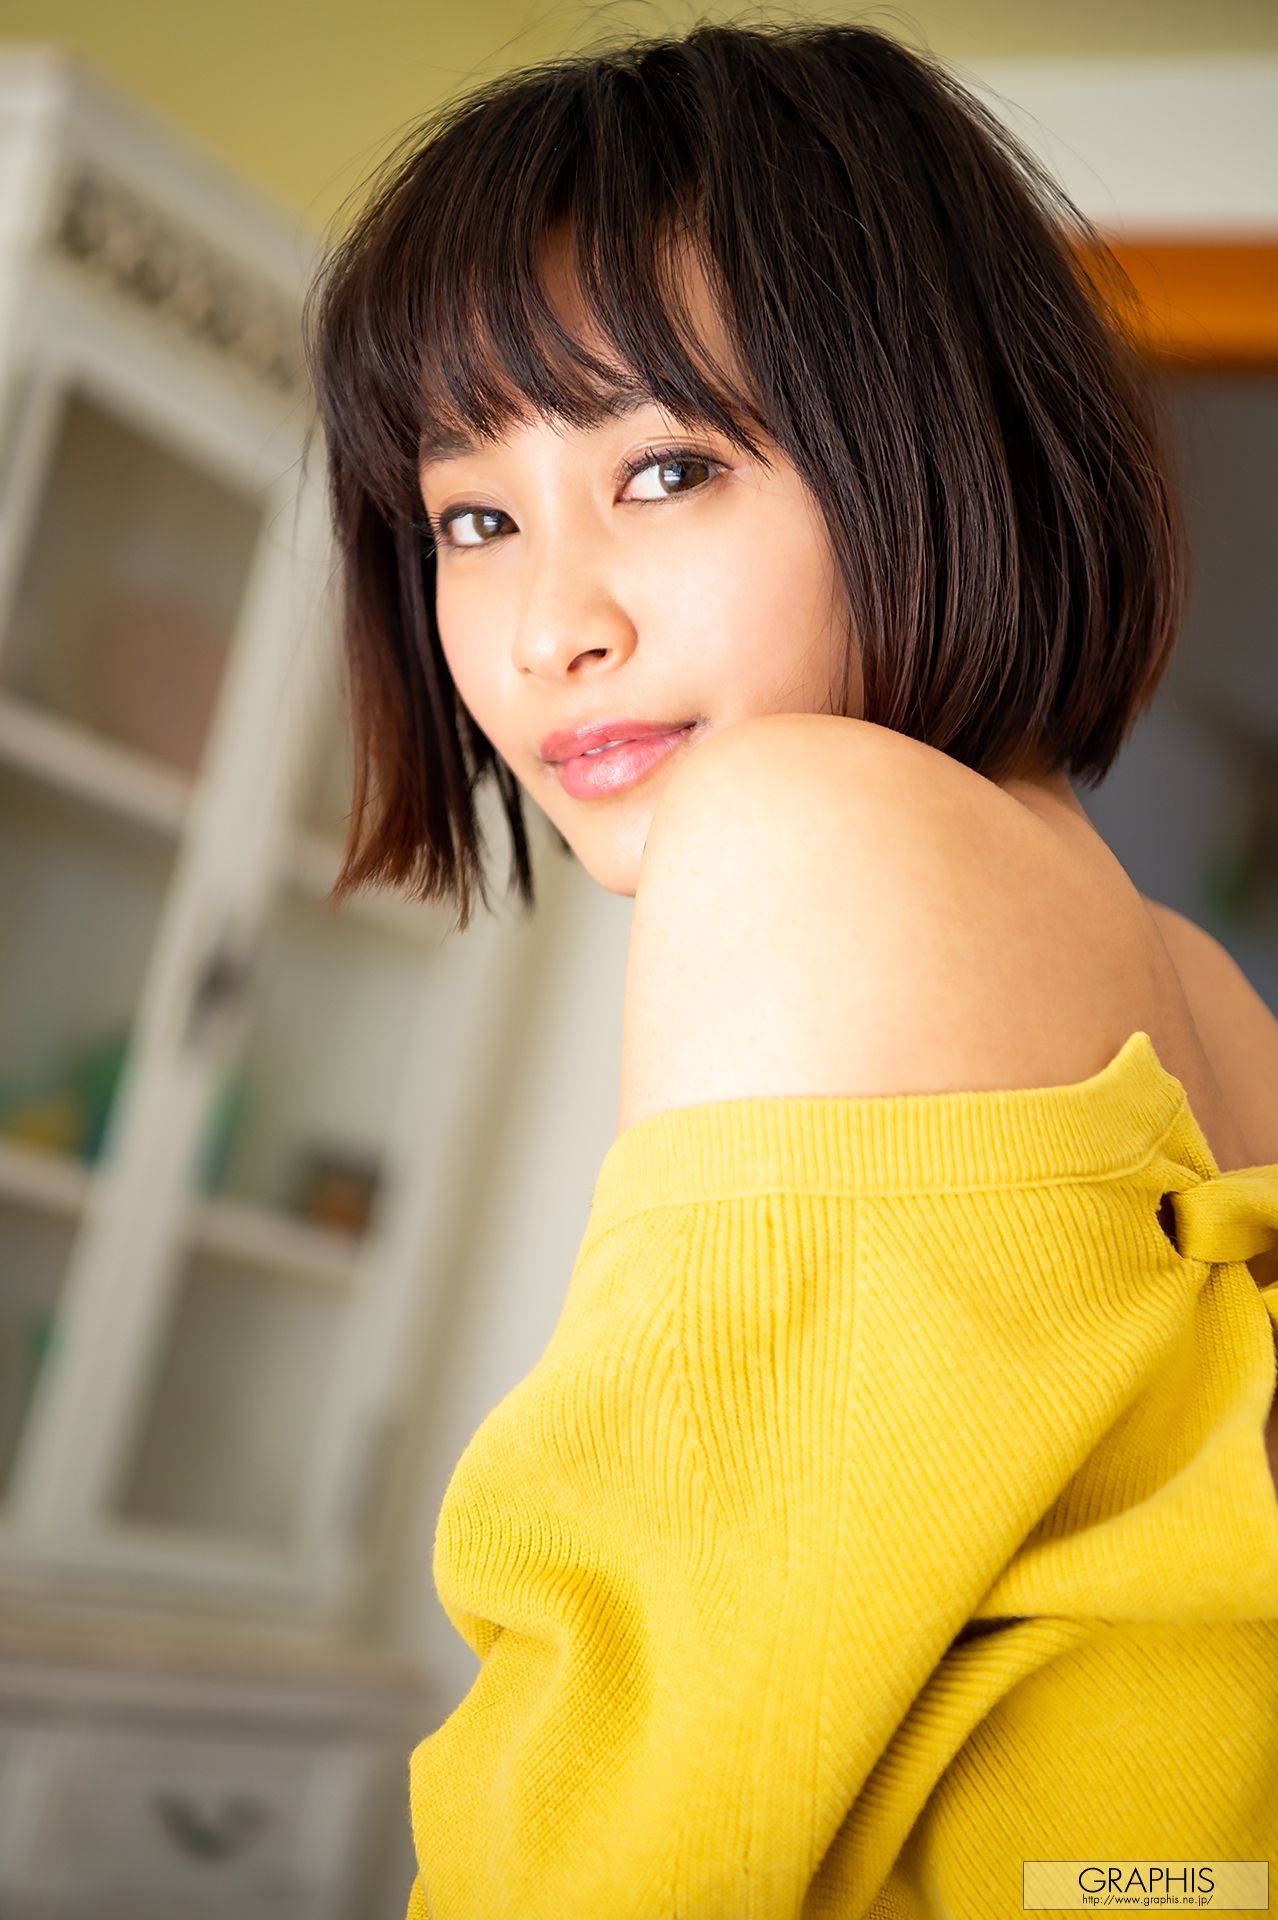 [Graphis] First Gravure 初脱ぎ娘 No.164 Rika Aimi 逢見リカ  第29张